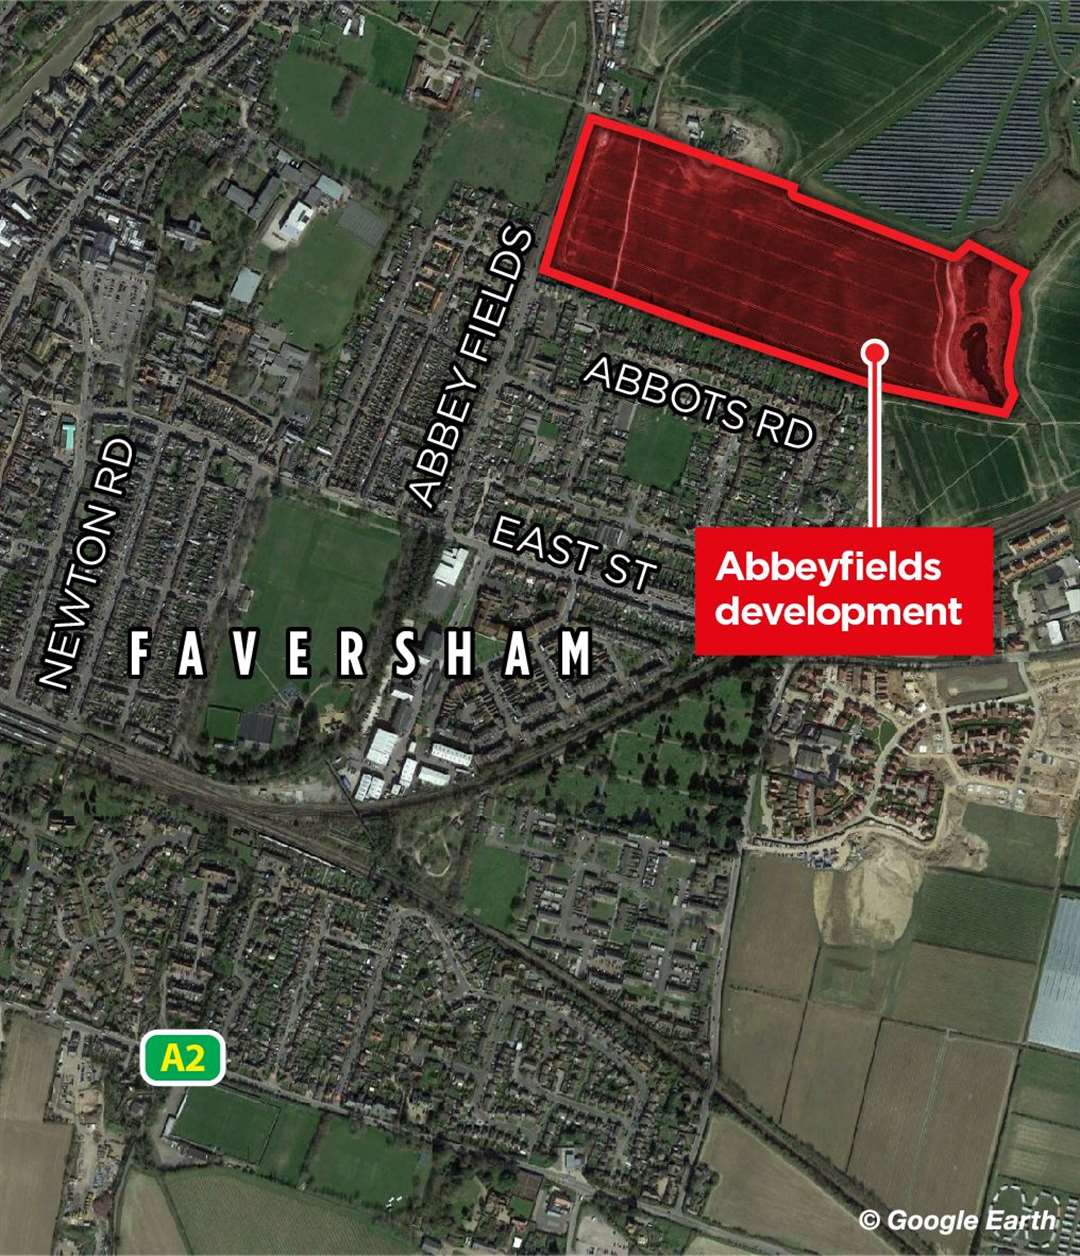 The development would be built on farmland off Abbeyfields, to the north-east of Faversham